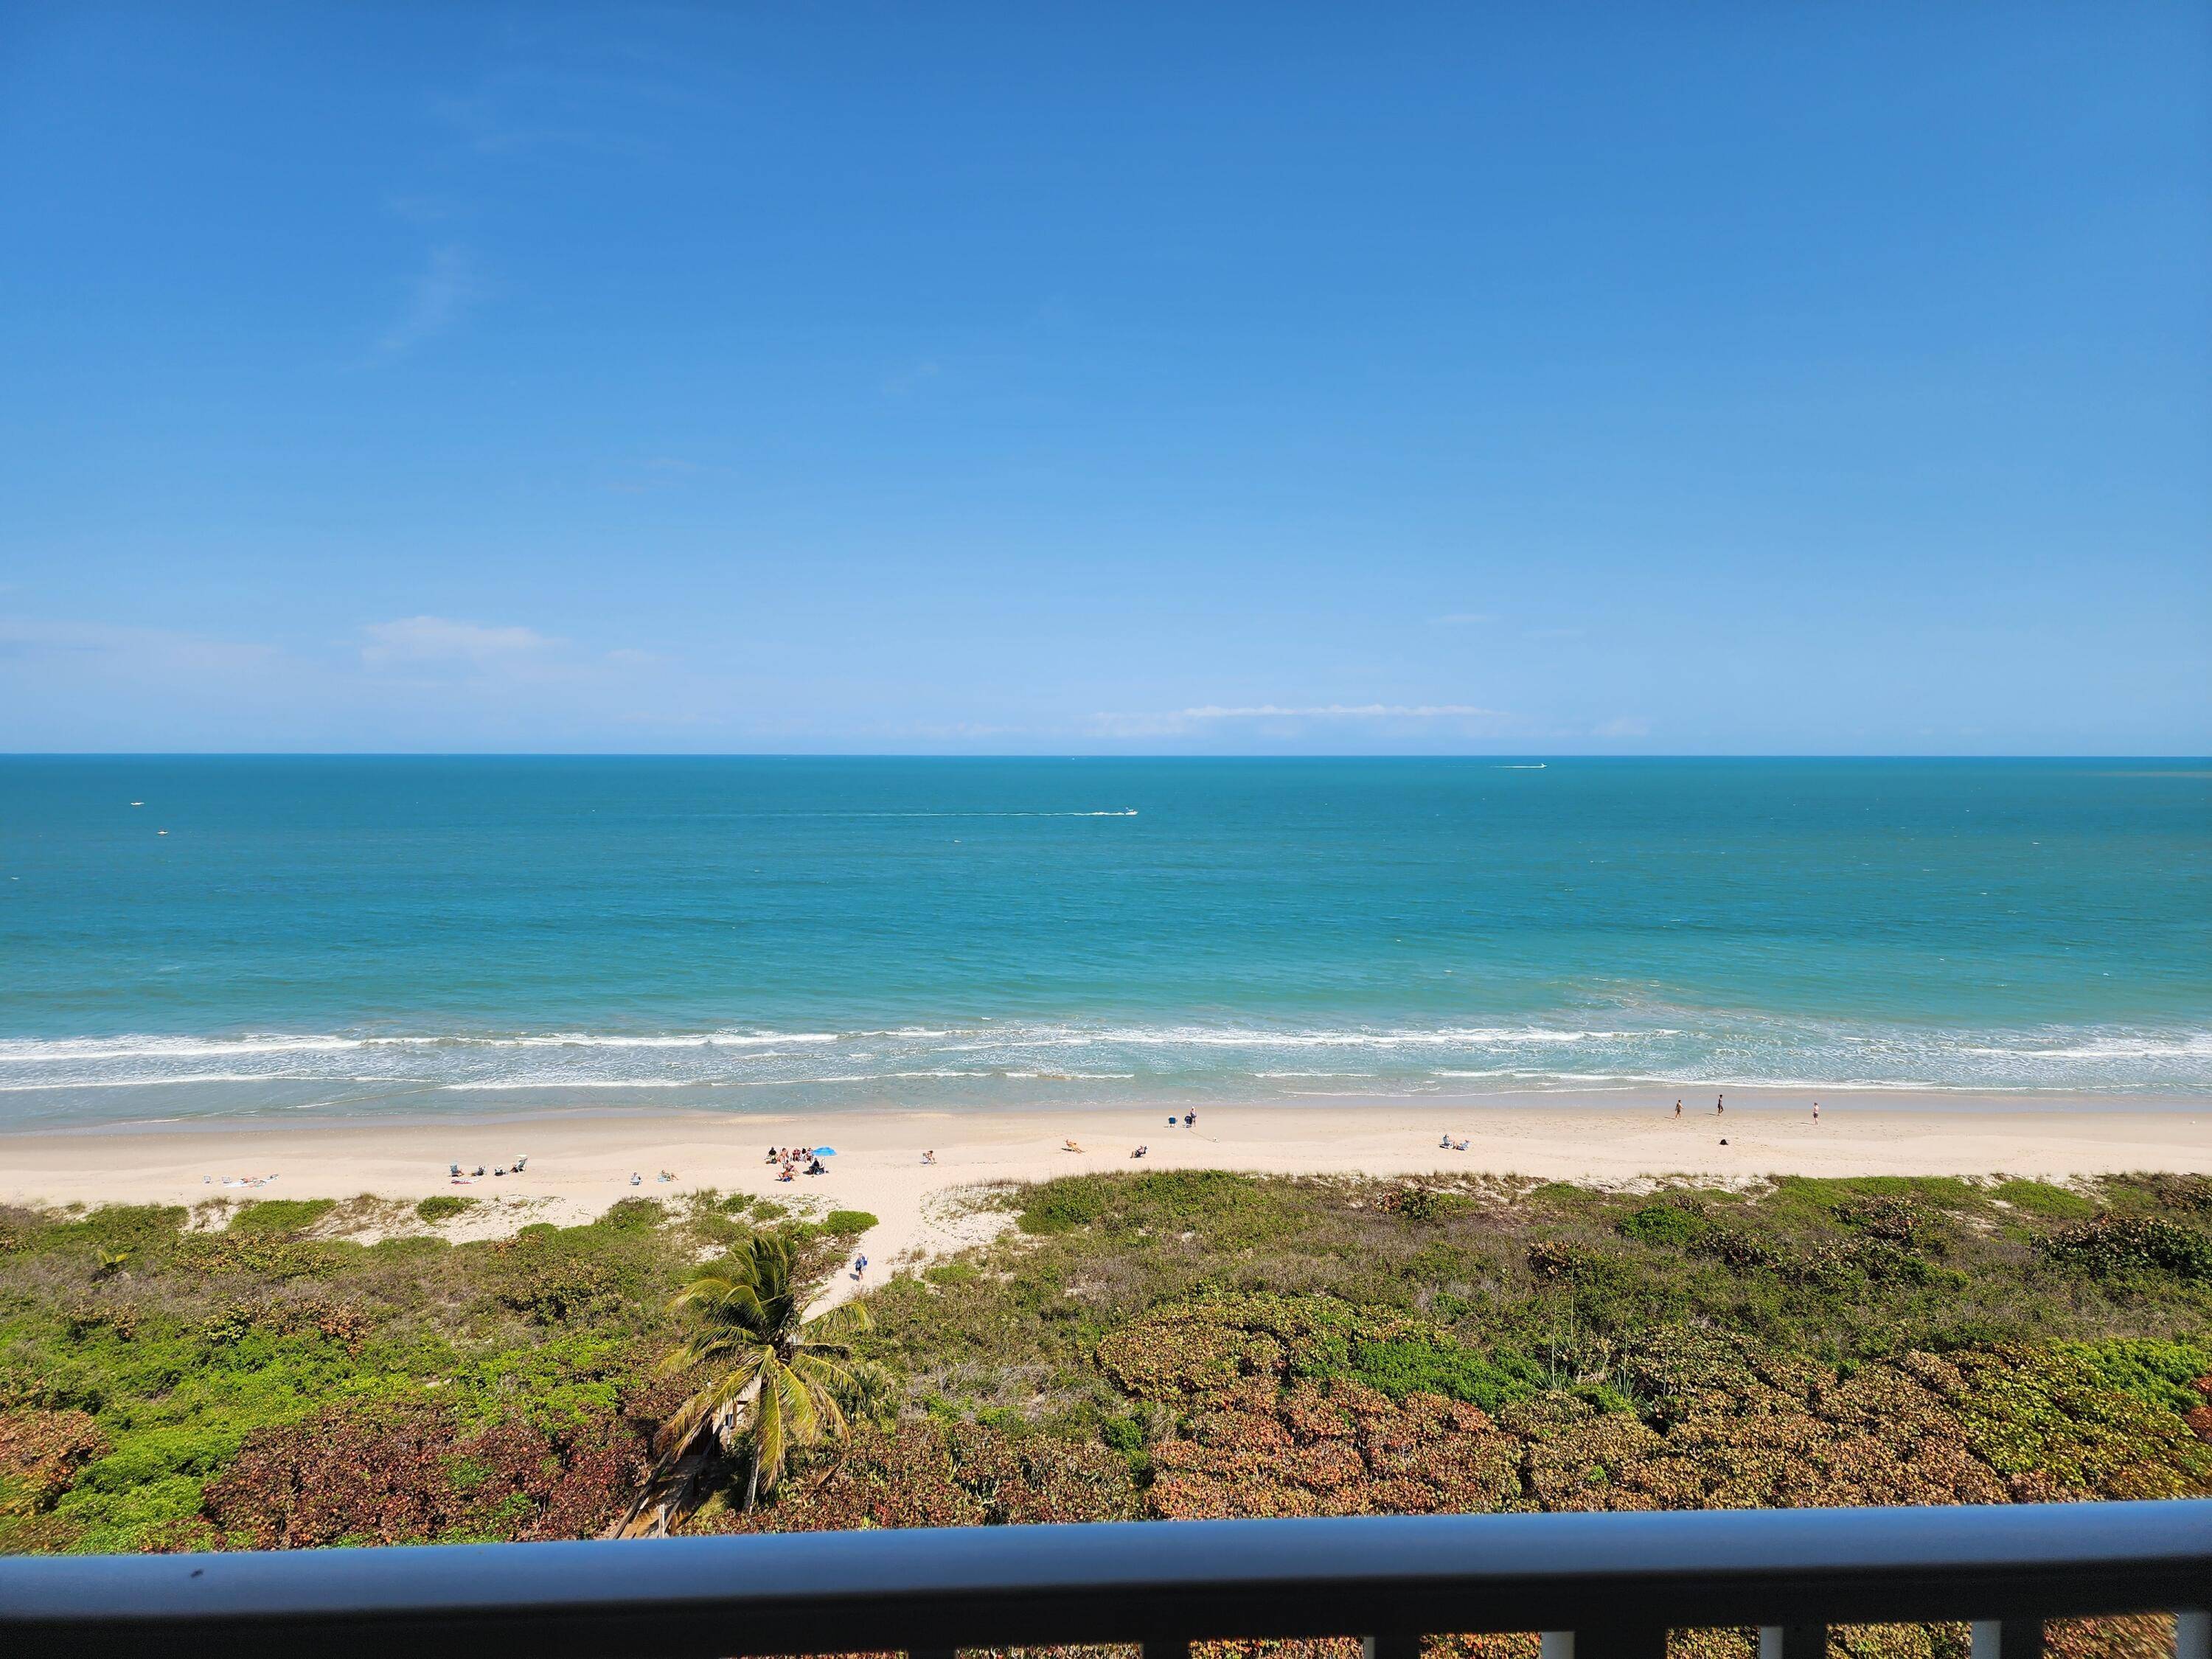 Fabulous opportunity to be on an 11th floor DIRECT oceanfront with accreting beach, panoramic ocean views and panoramic lagoon and river views up and down the coast !